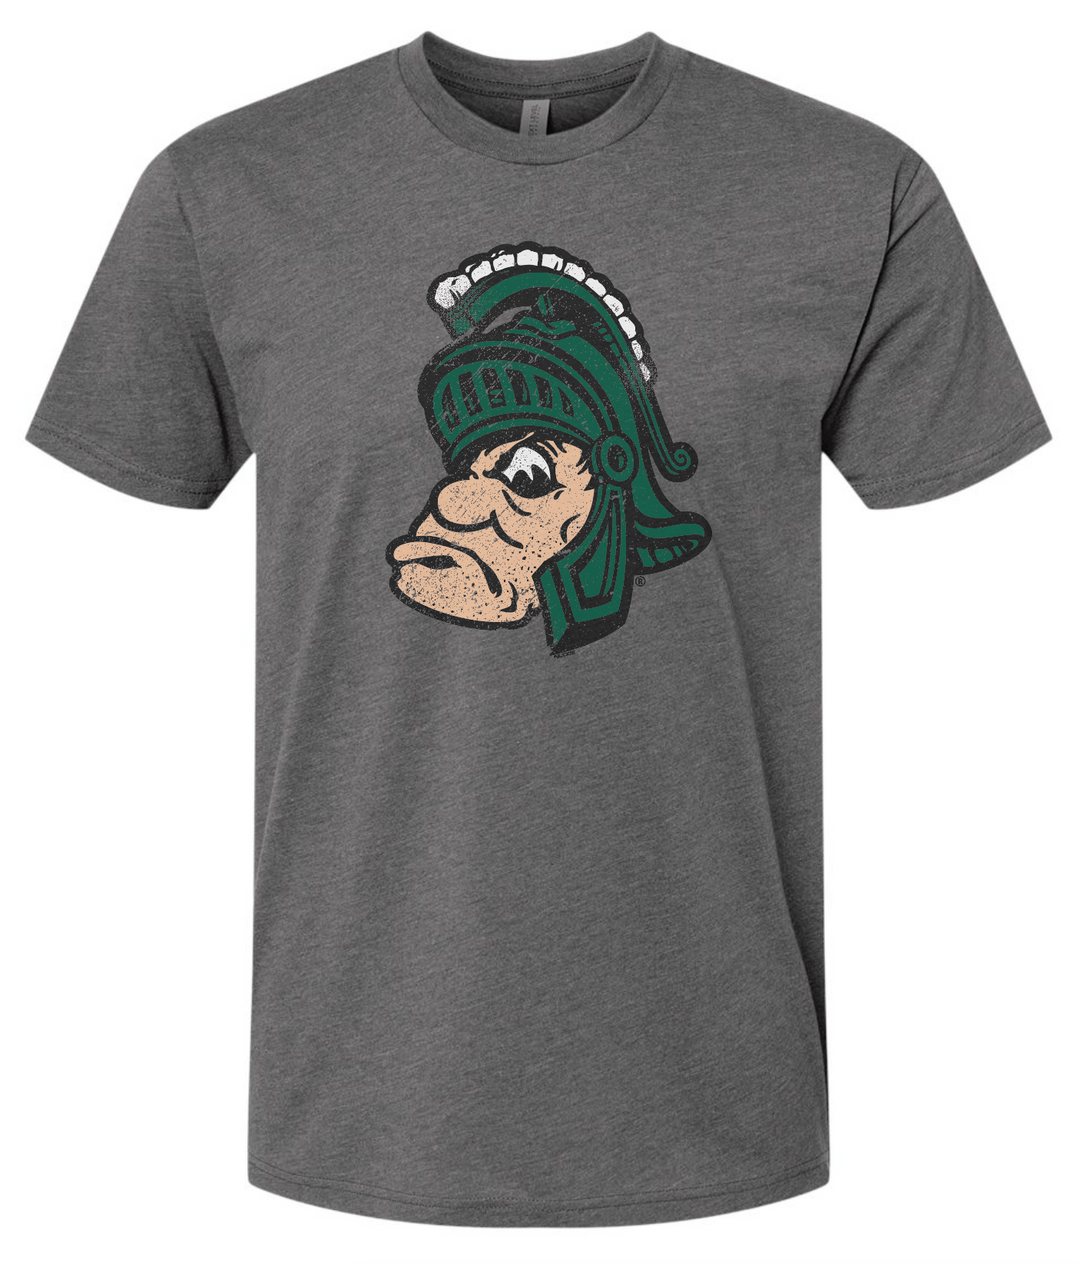 Vintage Michigan State T Shirt with Gruff Sparty